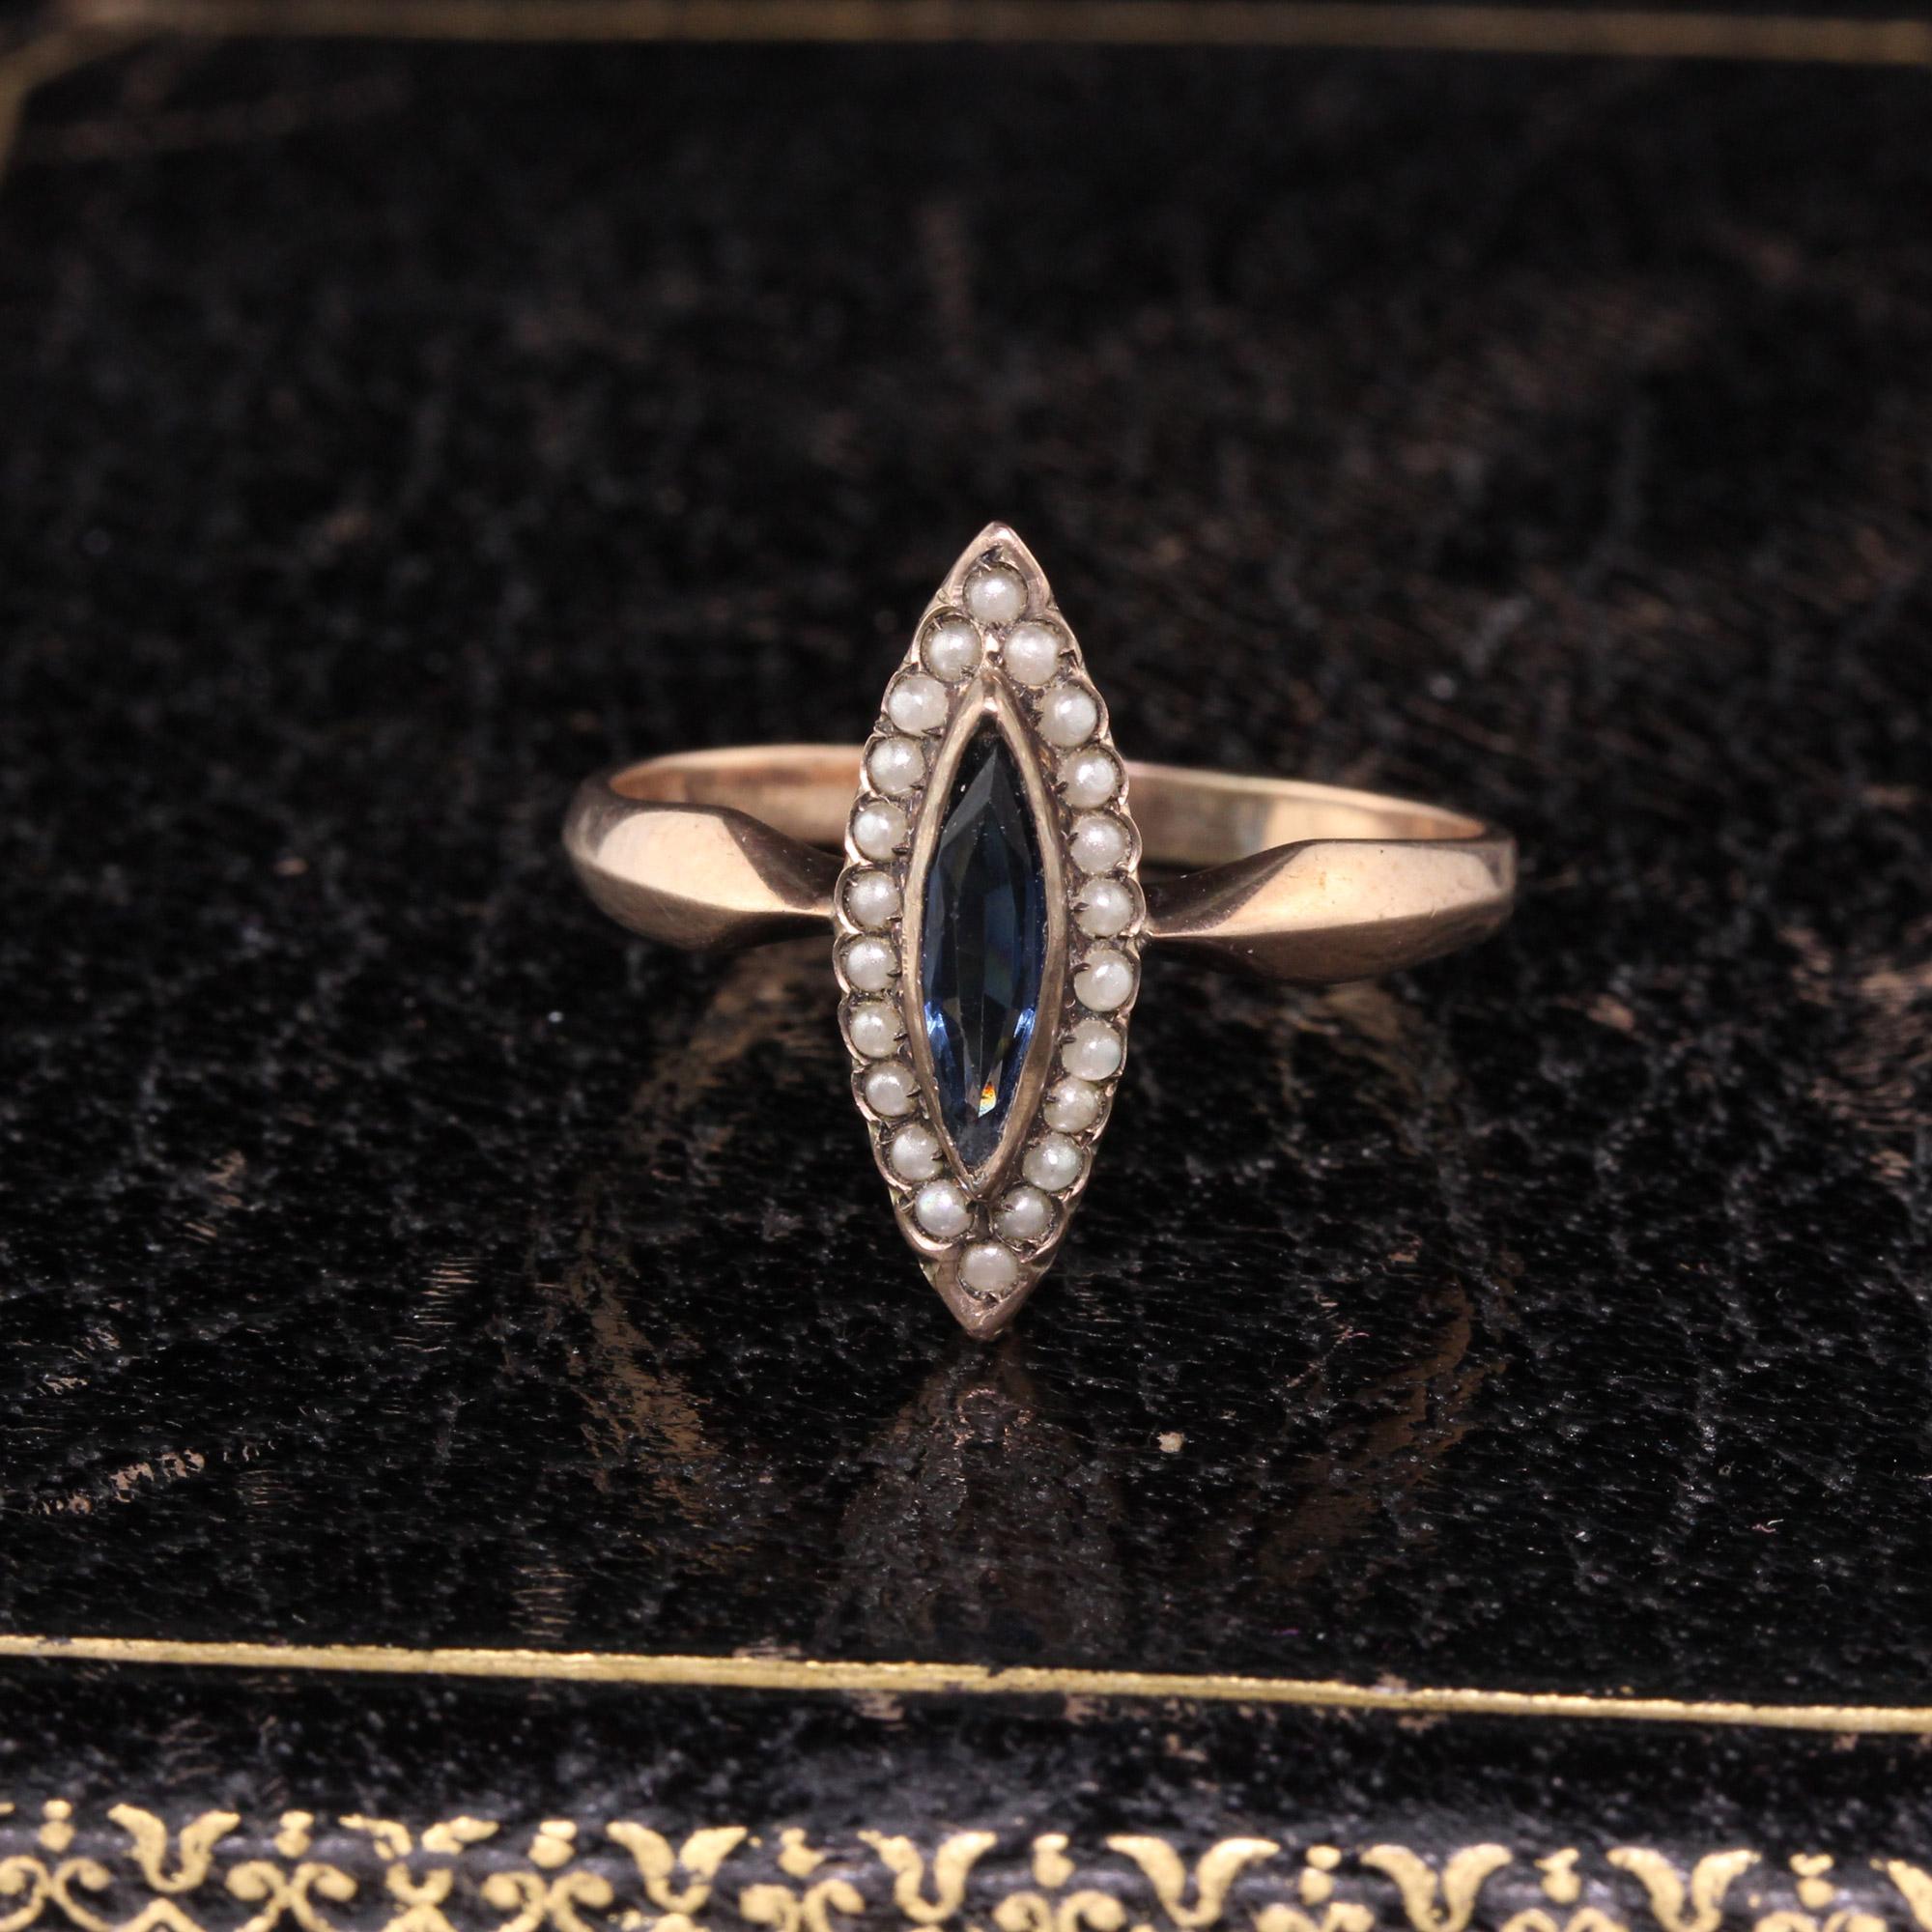 Gorgeous Victorian 8K Rose Gold navette ring a sapphire center and a halo of seed pearls.

#R0322

Metal: 8K Rose Gold

Weight: 2.0 Grams

Center Stone: Sapphire 

Center Stone Size: 2.9 mm x 9.2 mm

Ring Size: 8

This ring can be sized for a $50